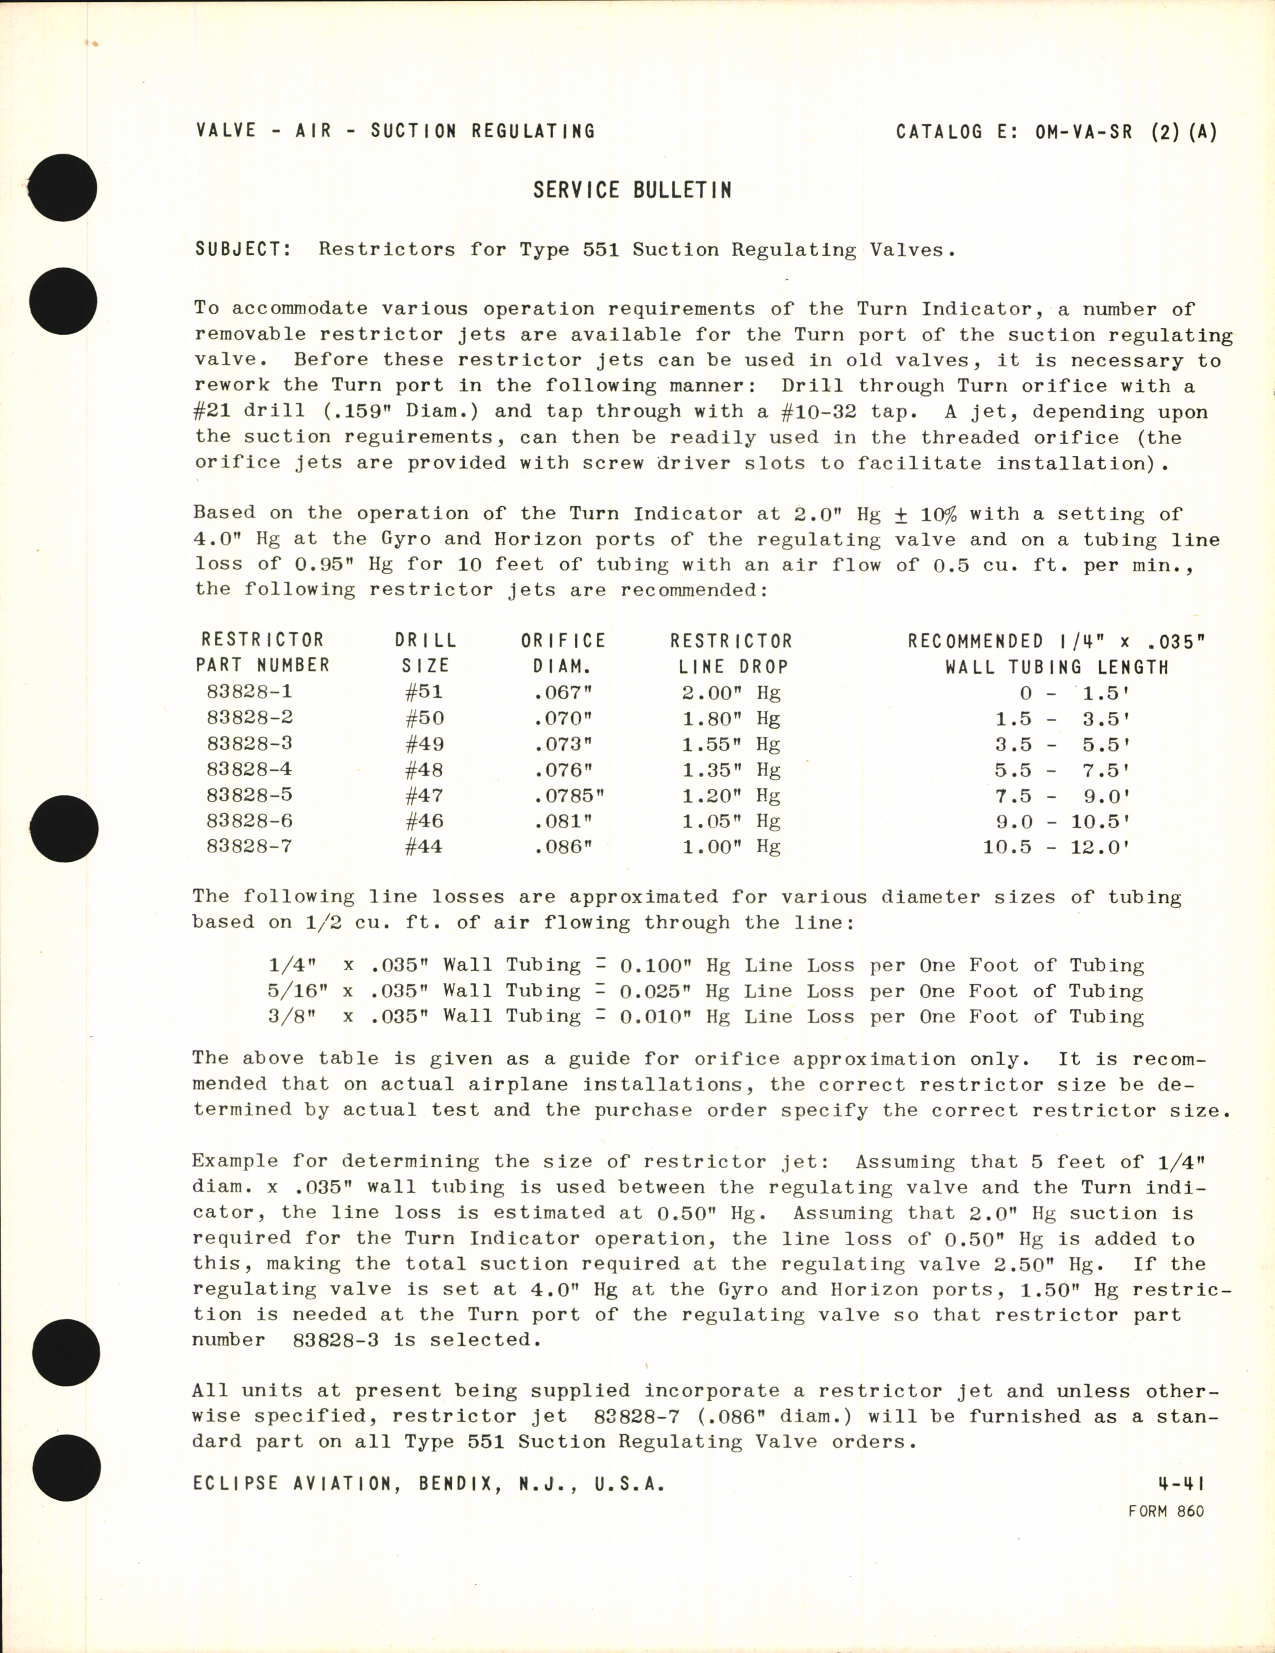 Sample page 1 from AirCorps Library document: Service Bulletin, Subject: Restrictors for Type 551 Suction Regulating Valves